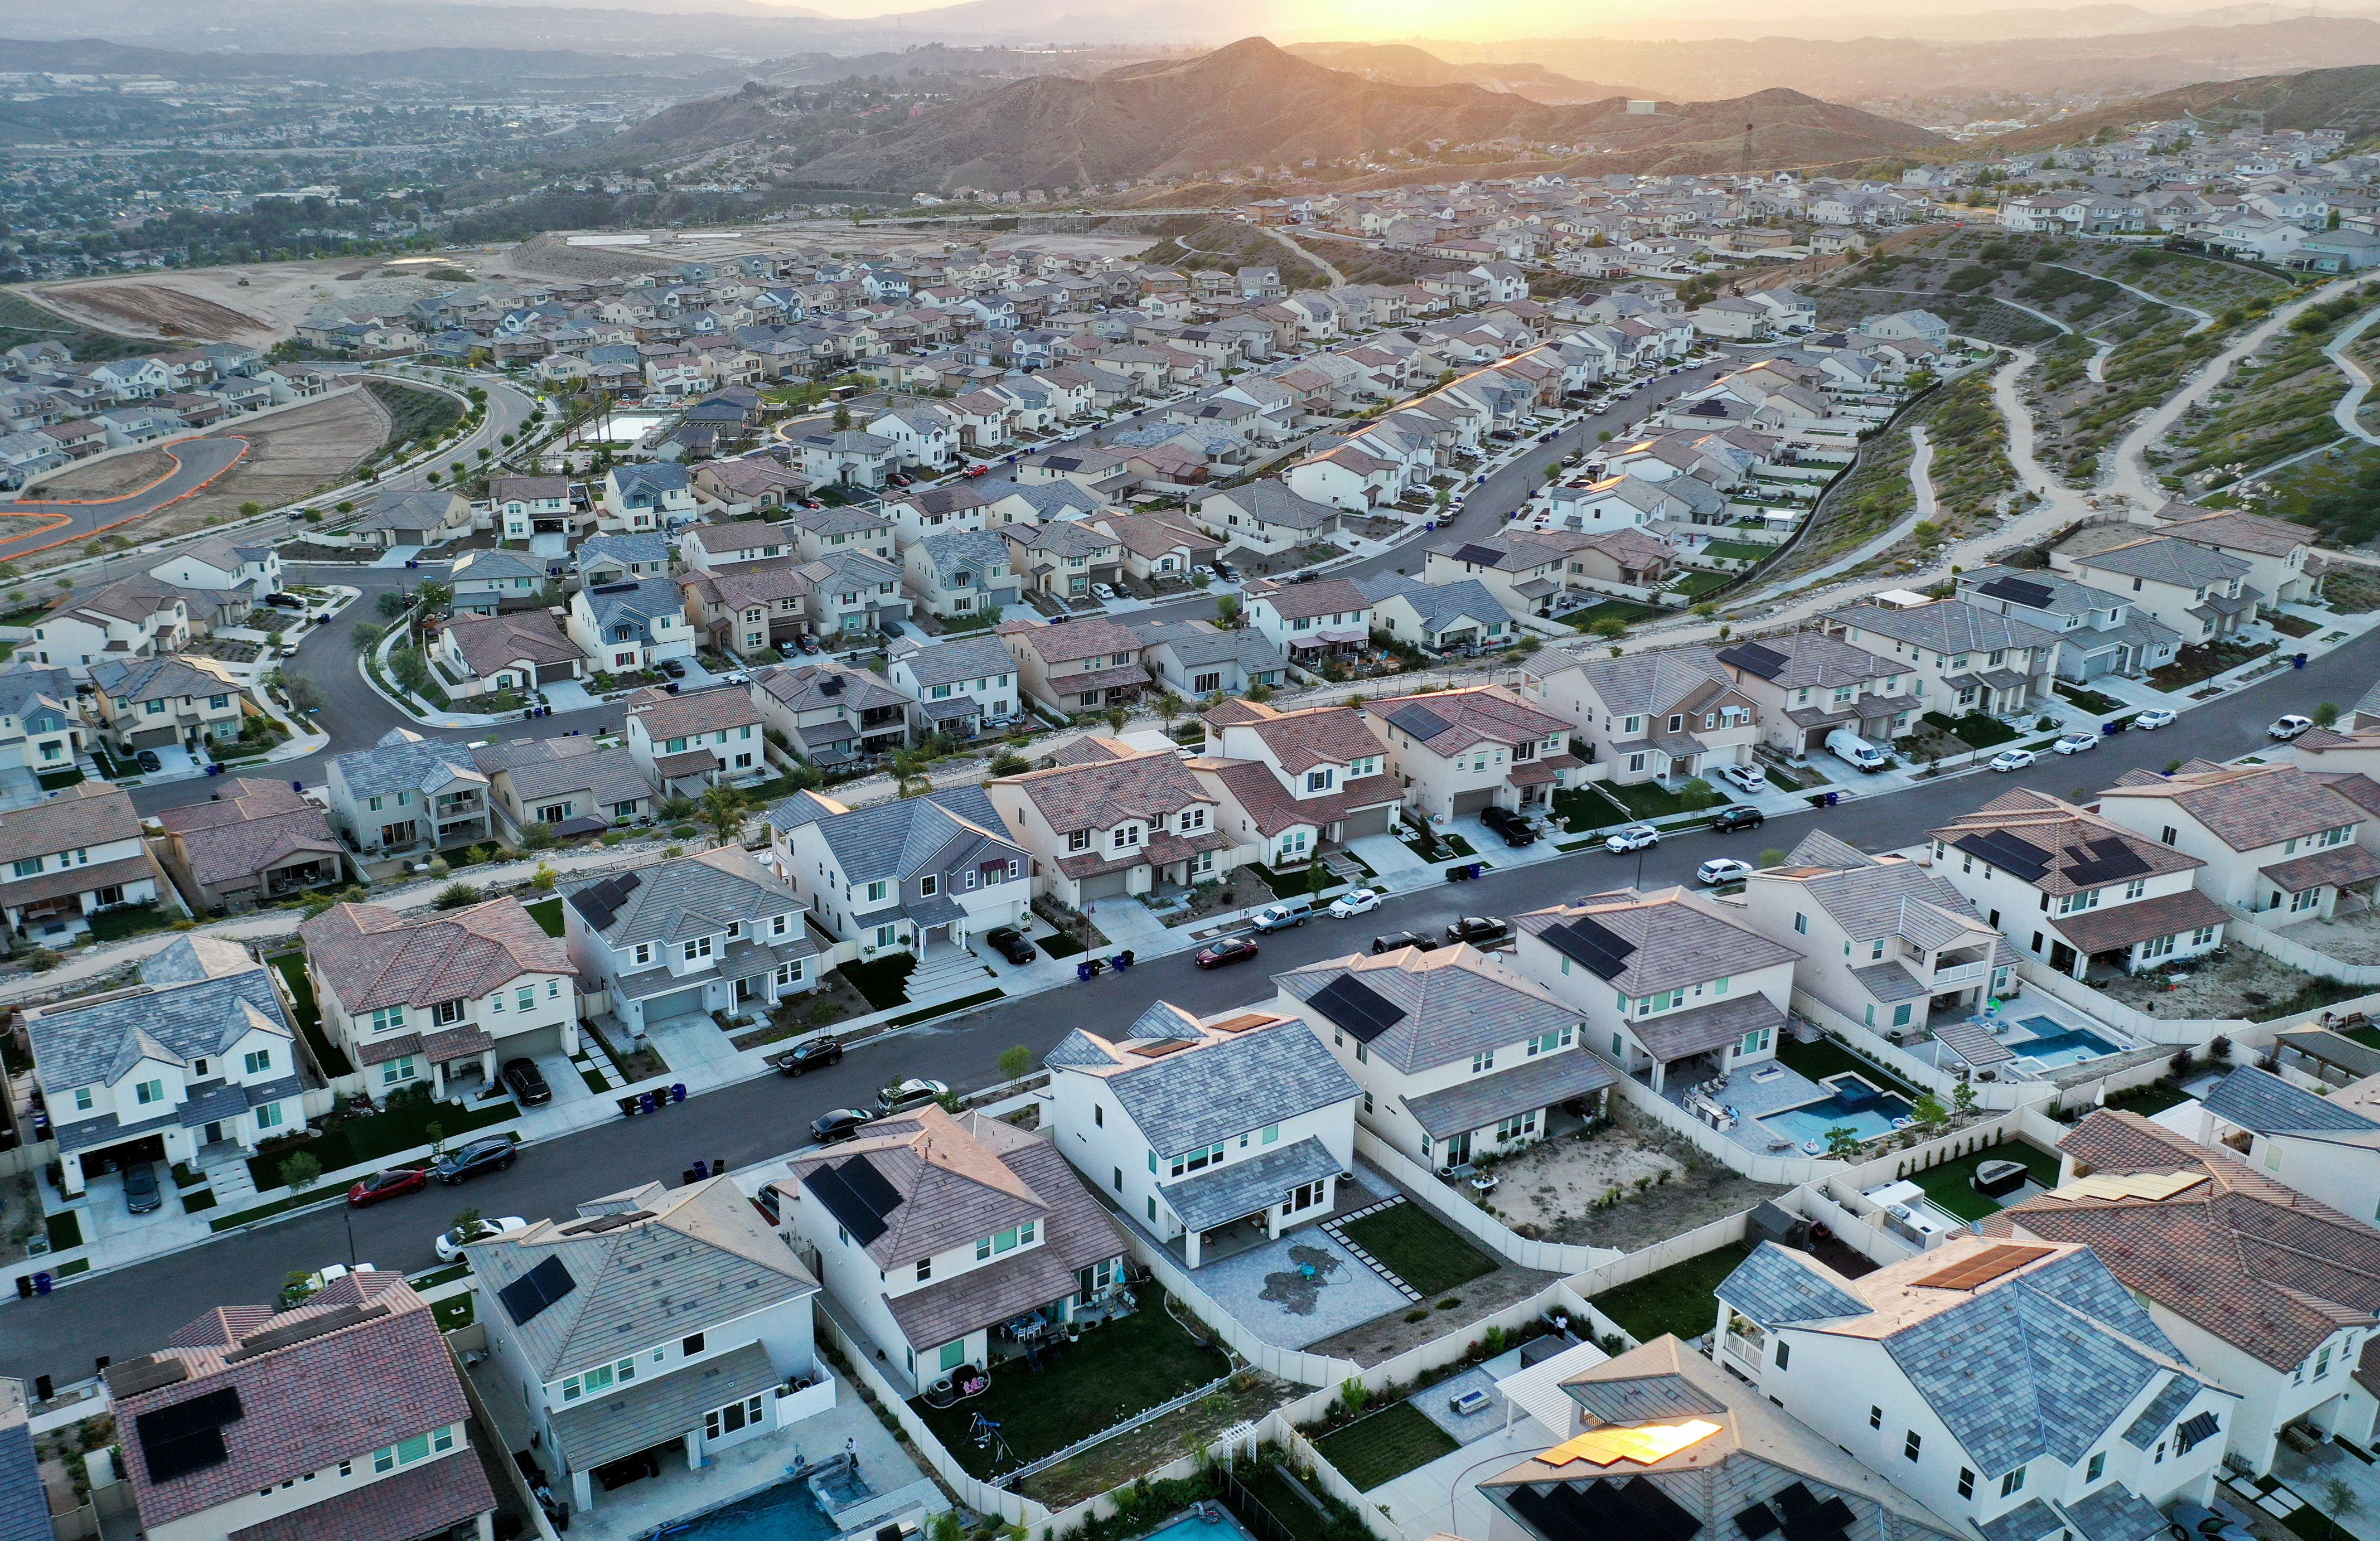 rooftop solar panels are flooding california’s grid. that’s a problem.